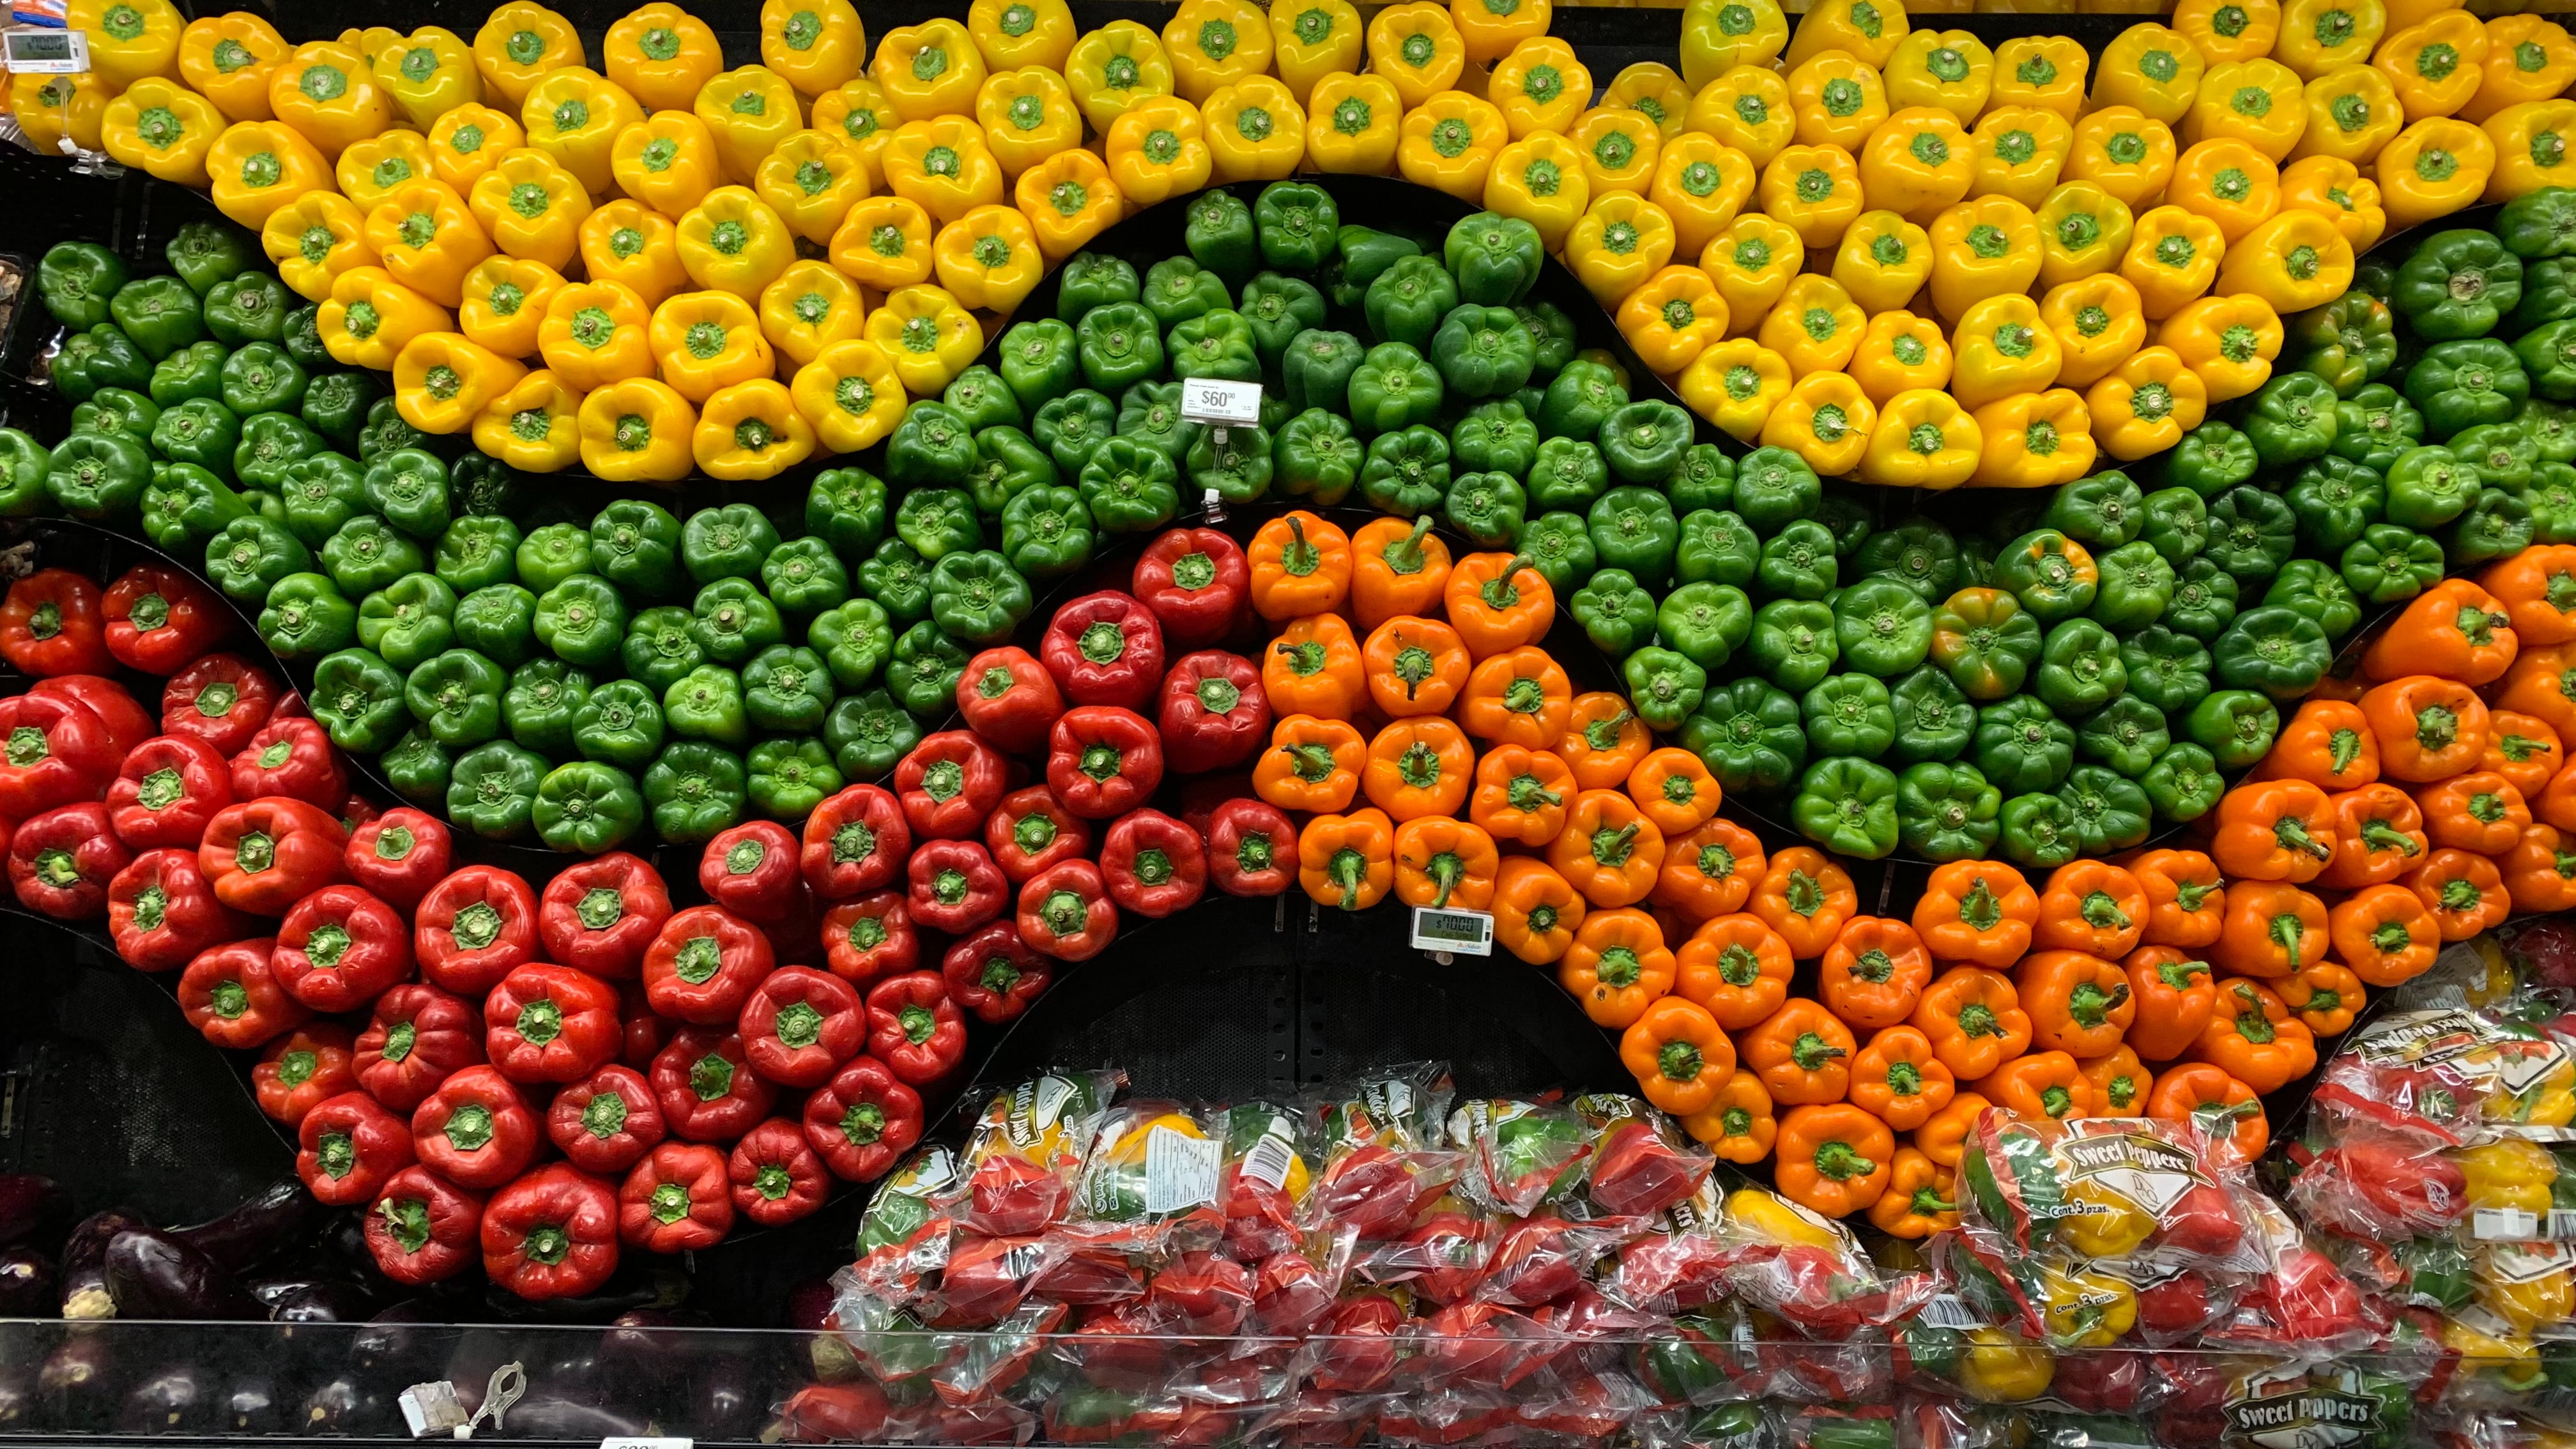 a wave pattern formed by yellow, green, red and orange bell peppers in a grocery store